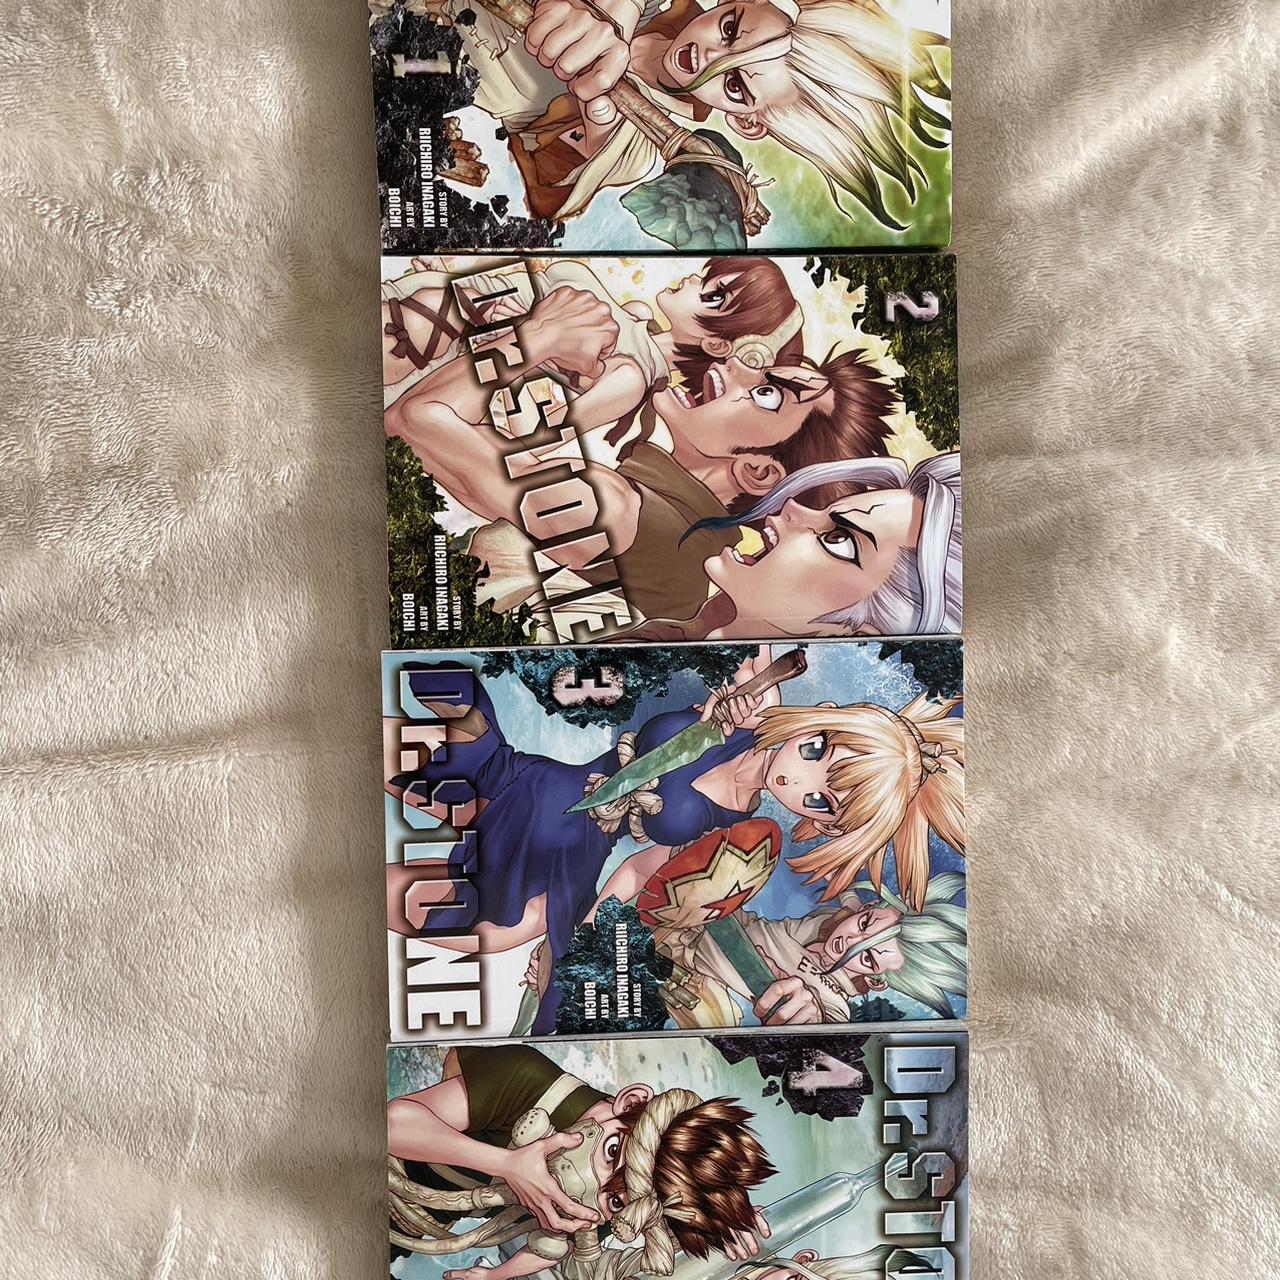 Dr. Stone Vols 1-4 , Never read, only ever...